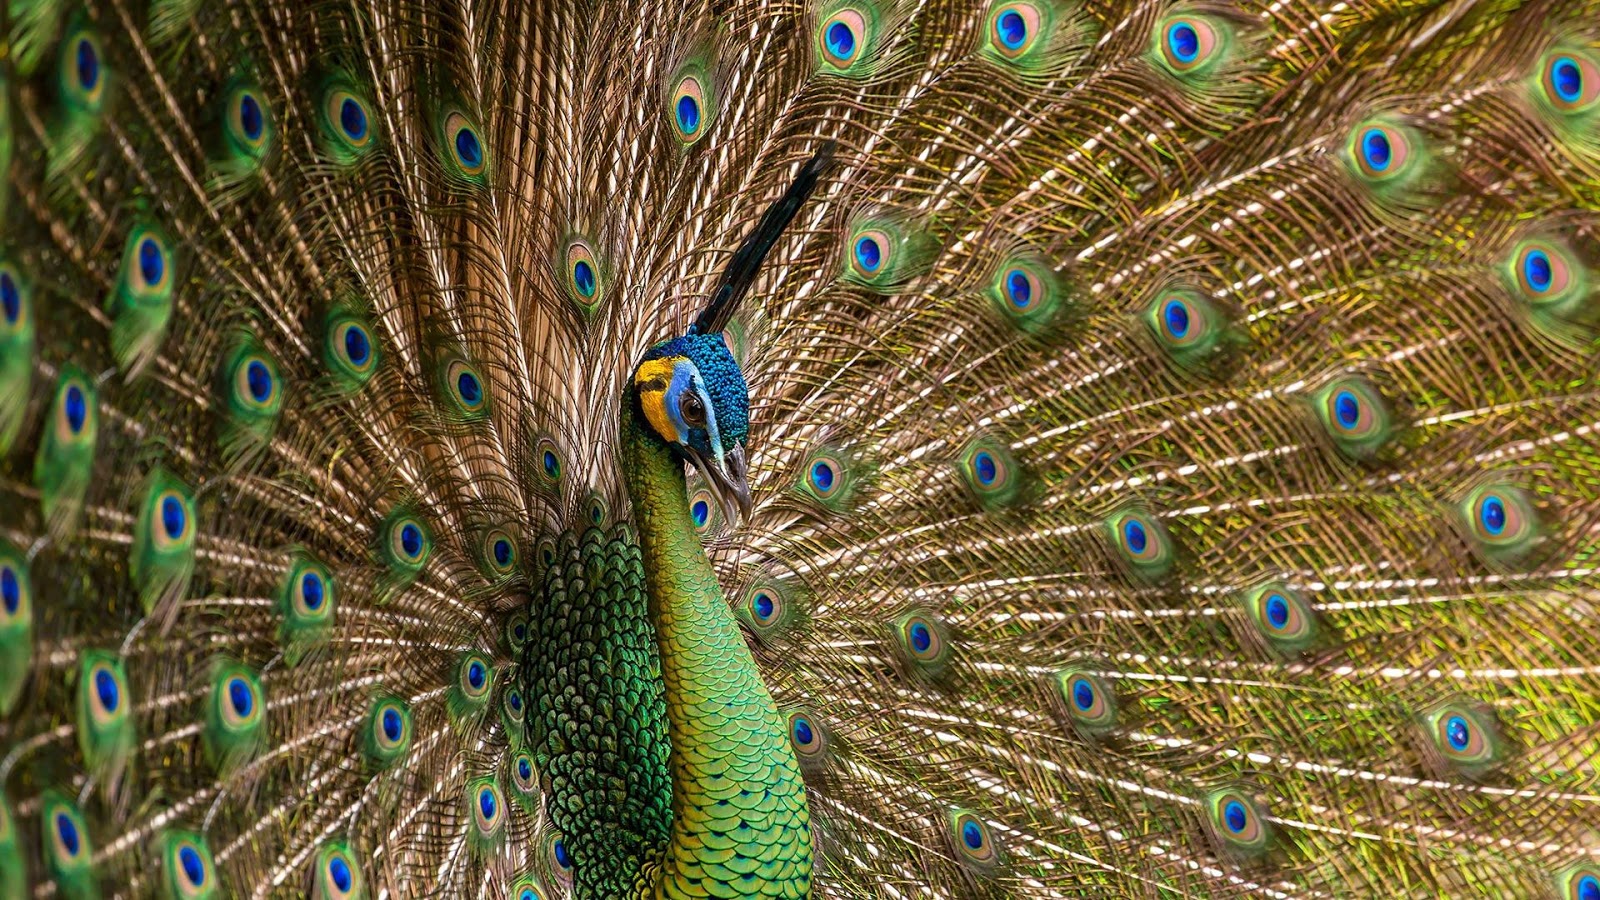 Peacock Feather Live Wallpaper - Android Apps on Google Play